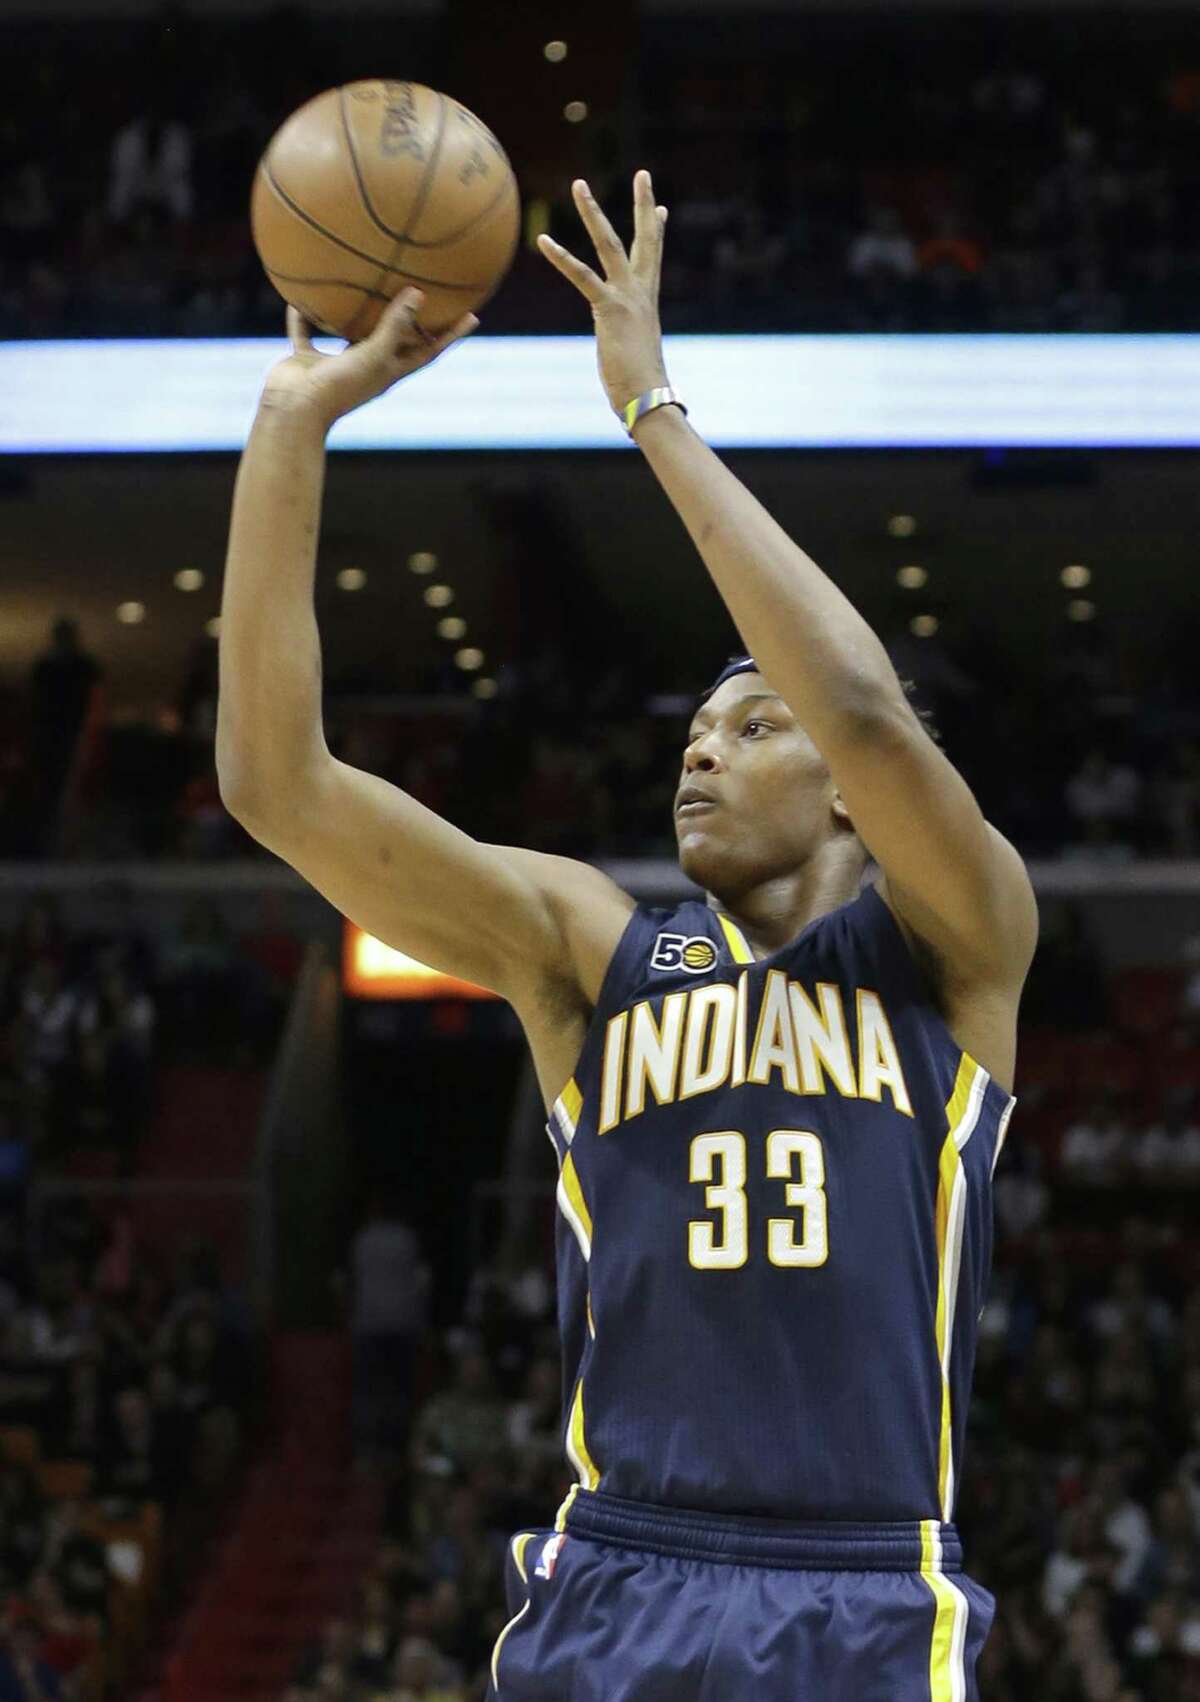 Indiana Pacers center Myles Turner (33) shoots against the Miami Heat during the first half of an NBA basketball game, Saturday, Feb. 25, 2017, in Miami. The Heat won 113-95. (AP Photo/Alan Diaz)